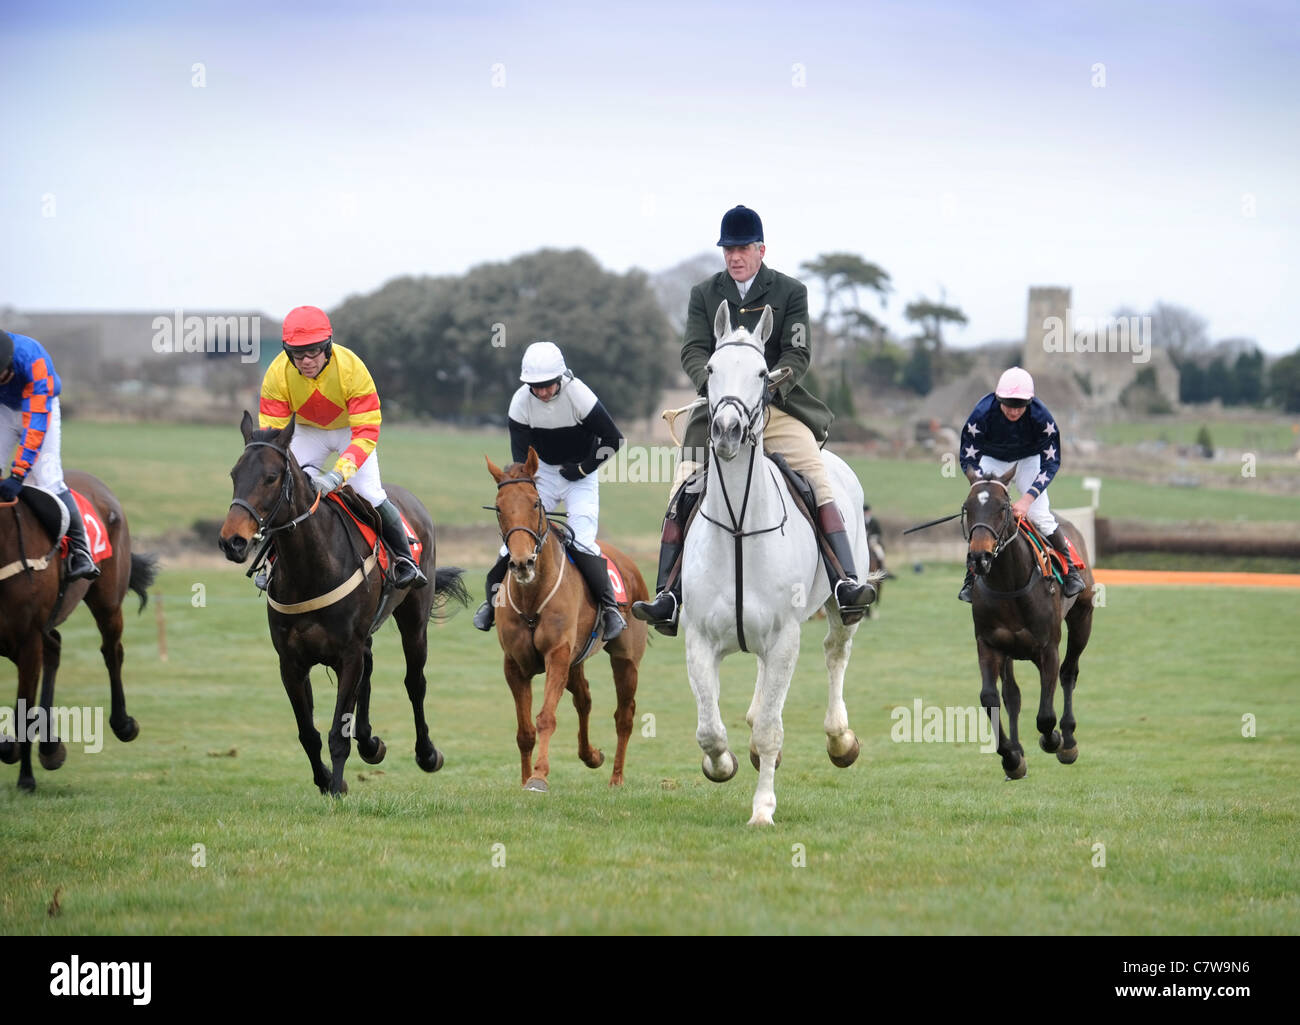 Sheknowsyouknow ridden by M. Wall (left, red diamond on silks) is escorted back after winning the Hunt members opening race at t Stock Photo